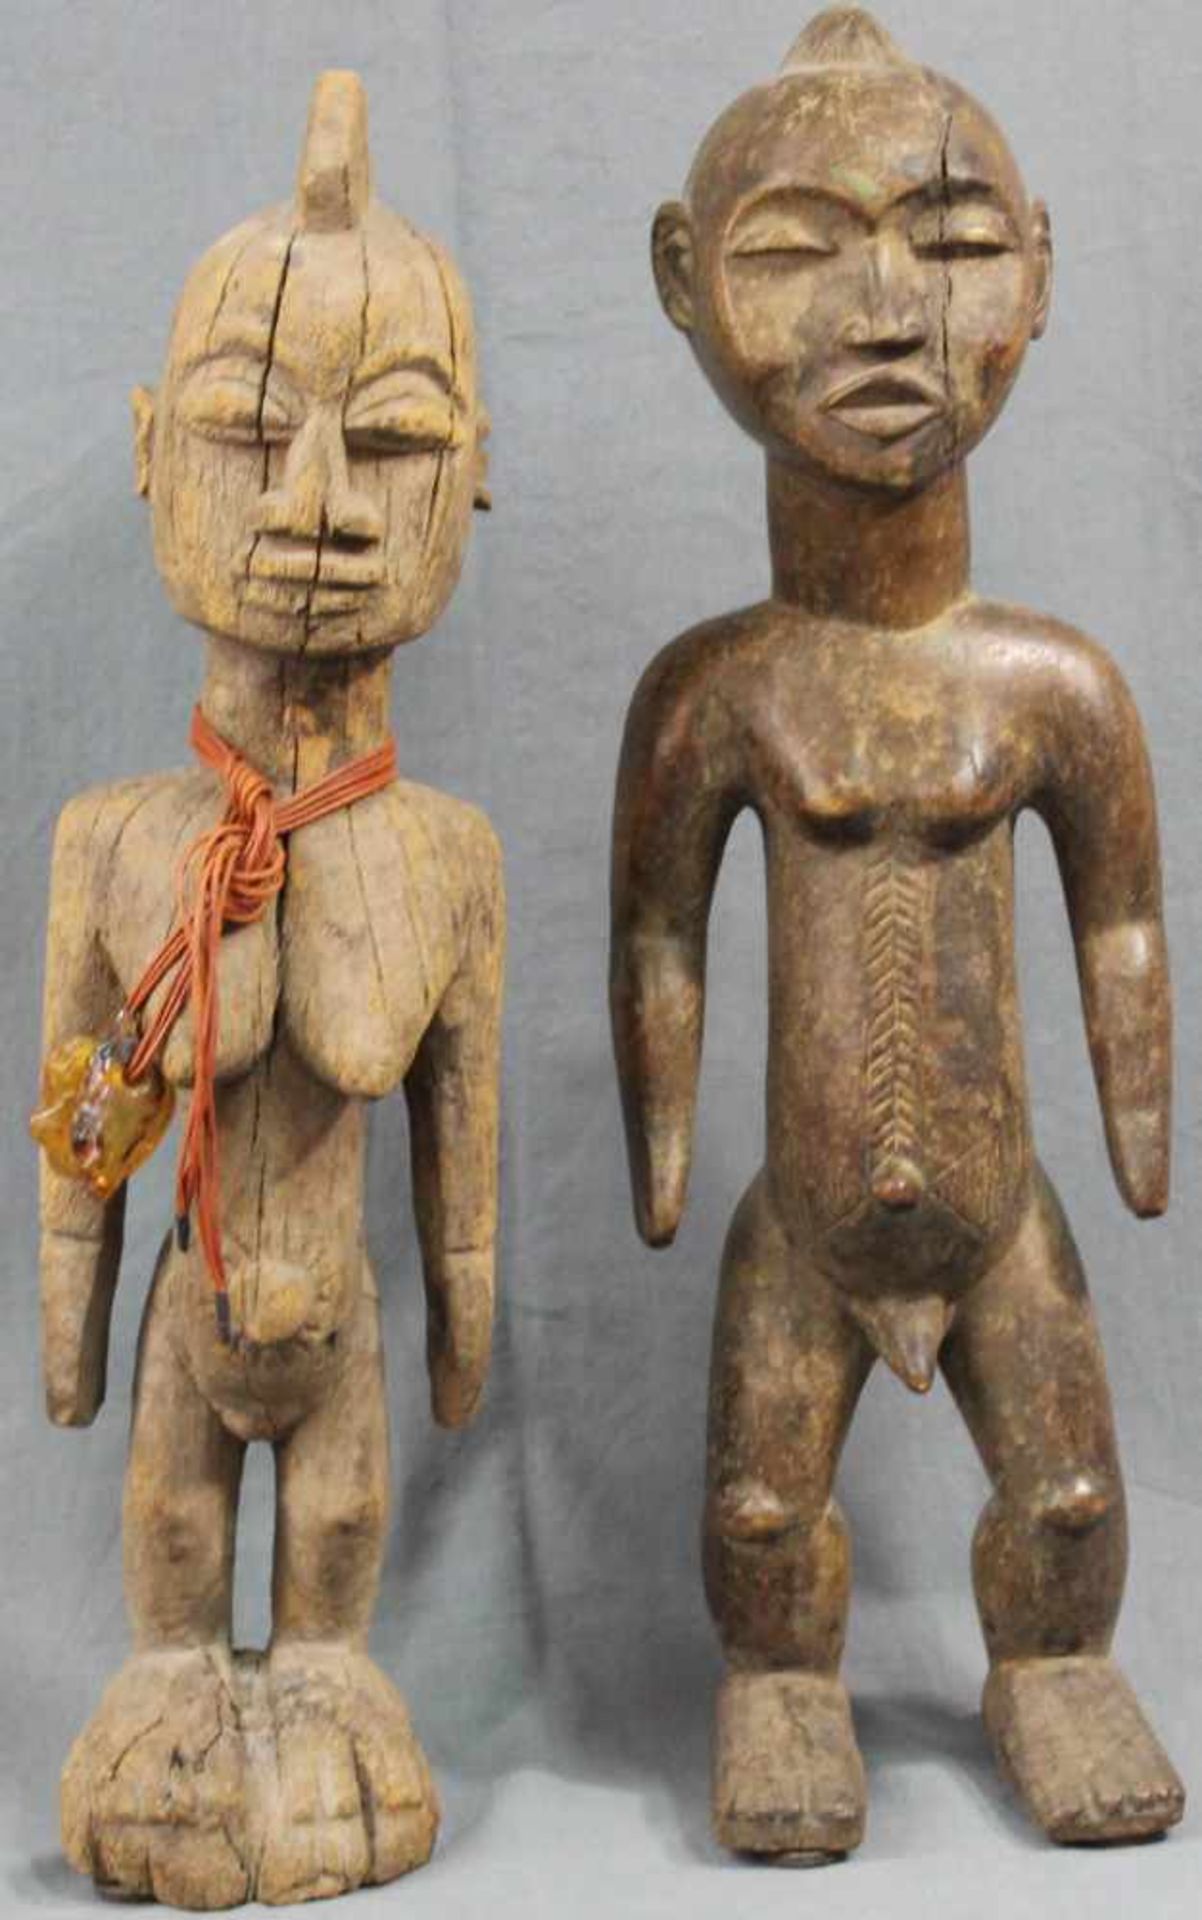 2 figures. Woman and man. Wood. Up to 50 cm high.